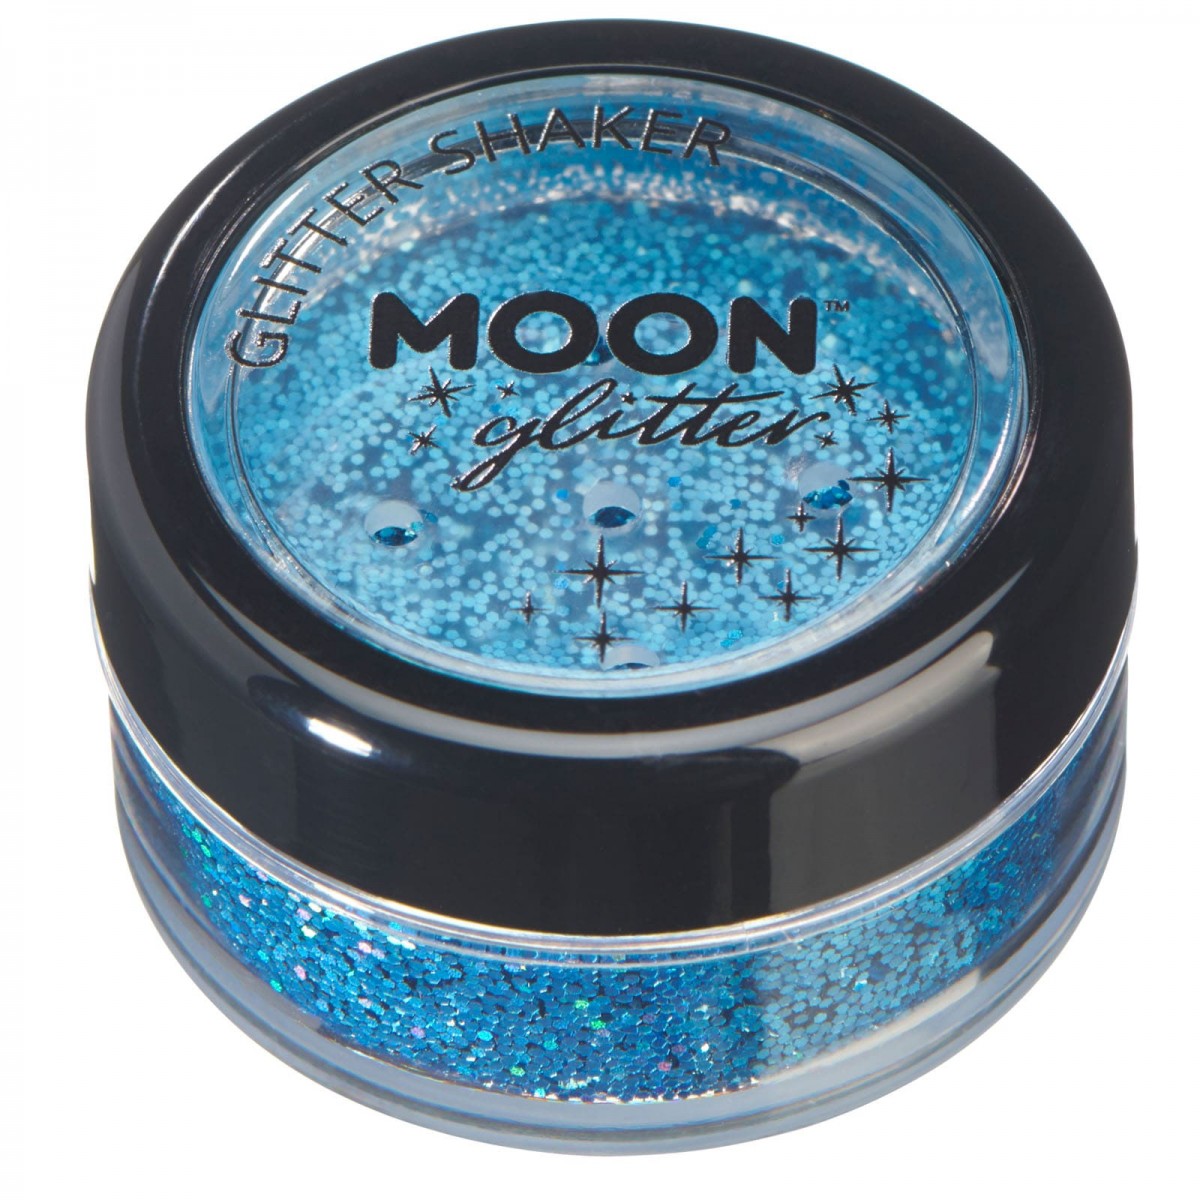 MOON CREATIONS G16 HOLOGRAPHIC GLITTER SHAKER BLUE 5g